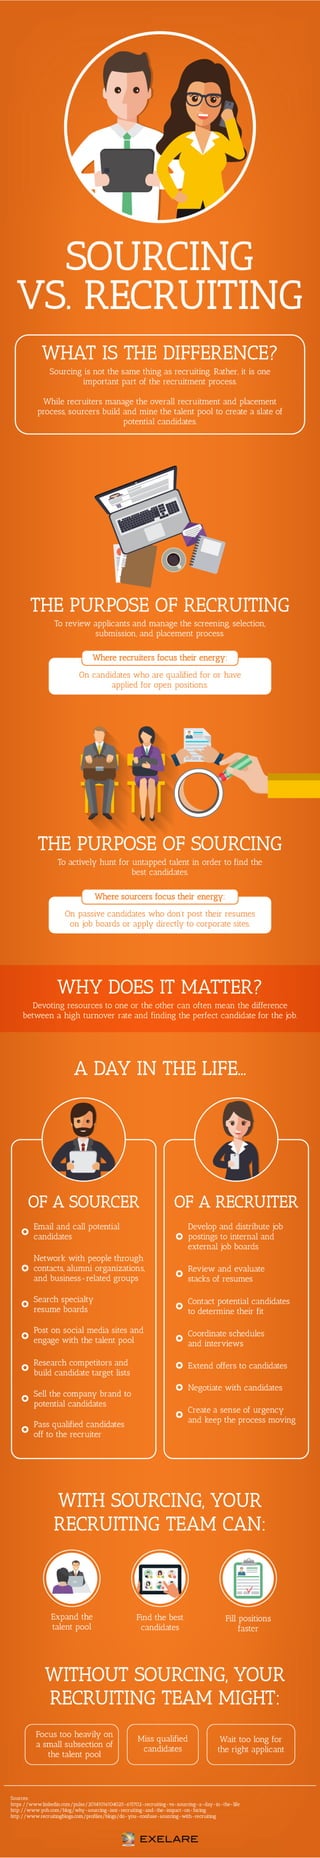 Sourcing vs Recruiting